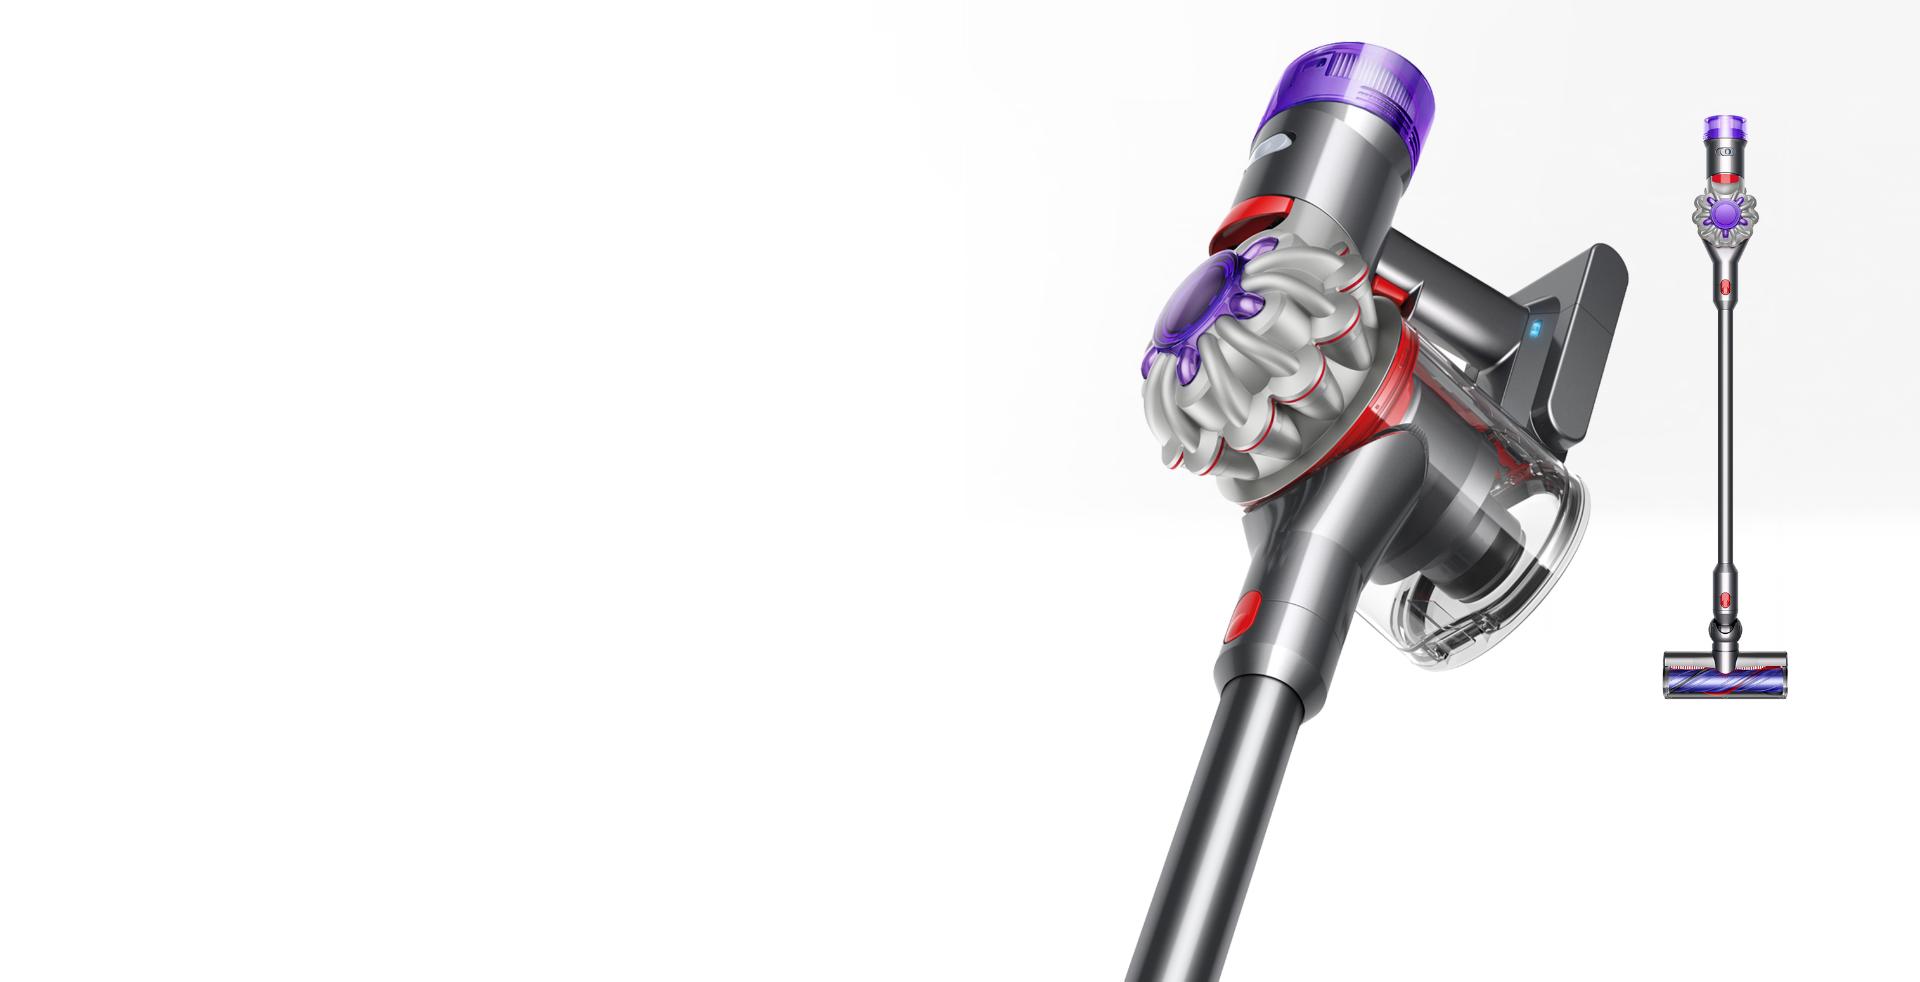 Dyson V8 vacuum shown in both full view and close-up.